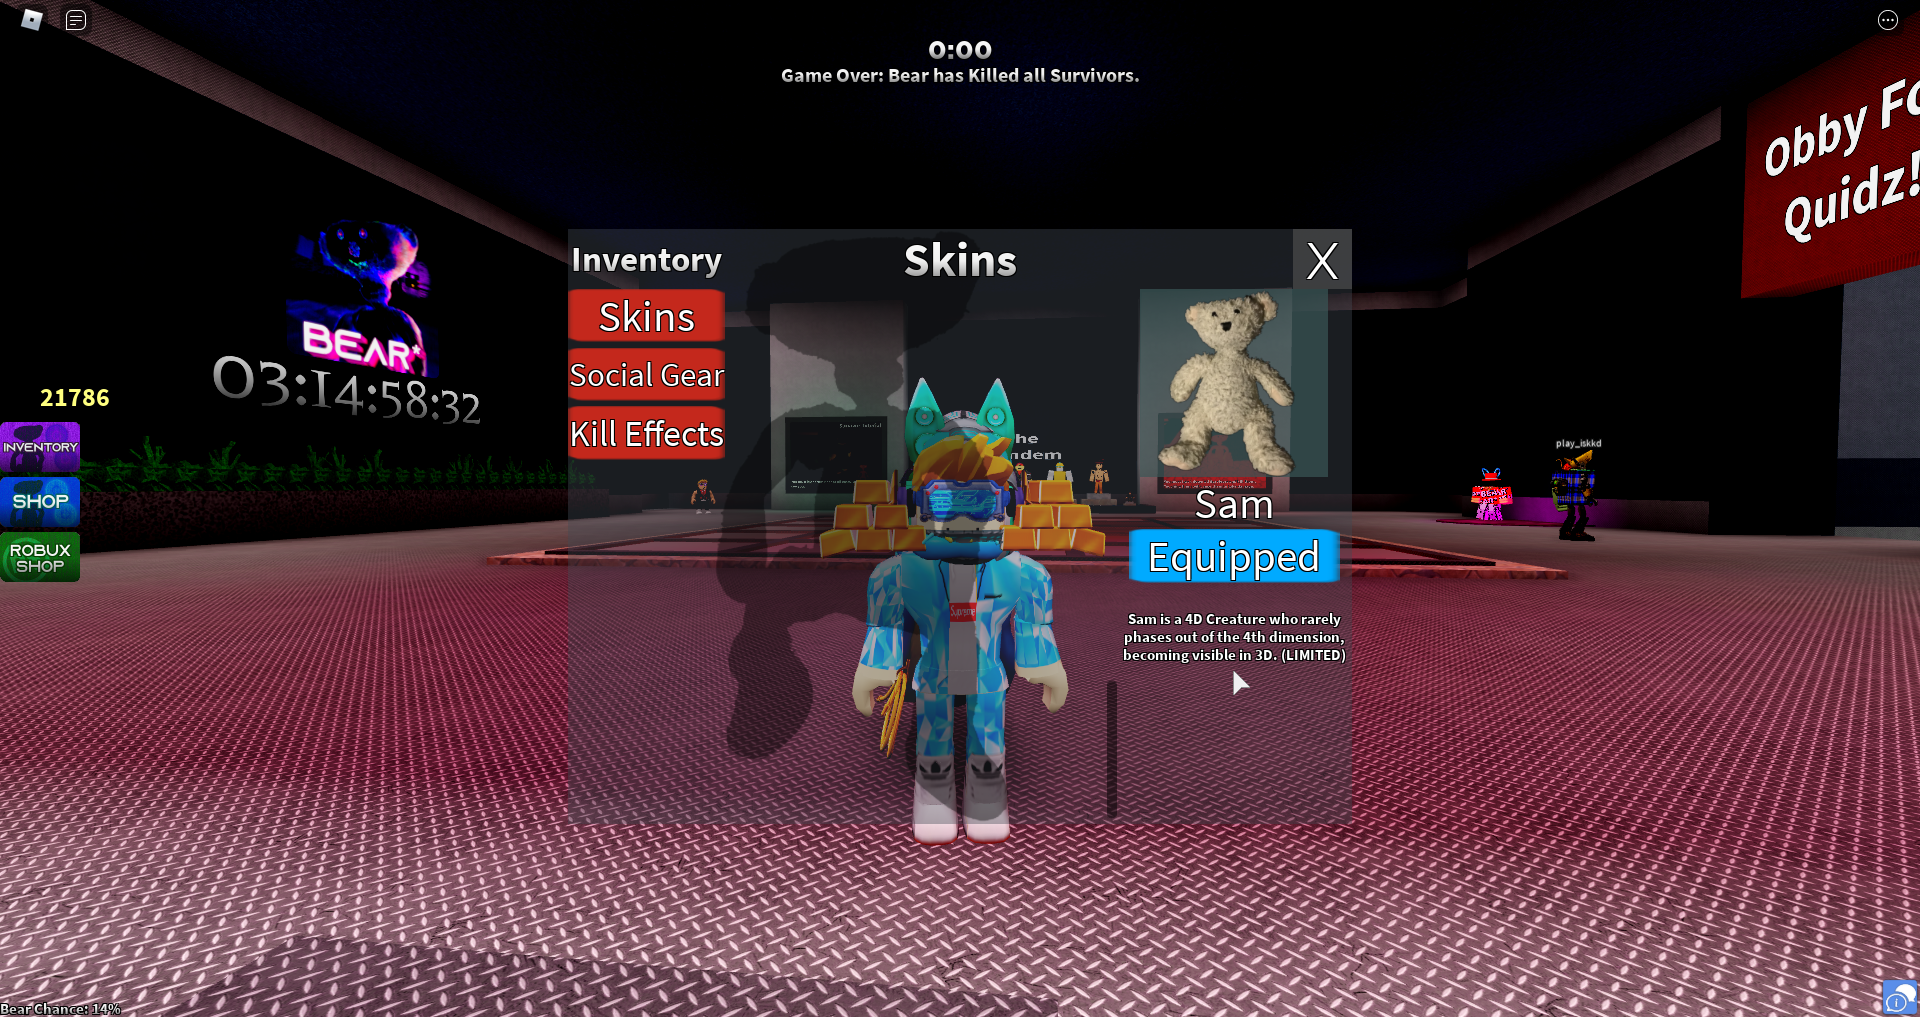 I Got Sam Nobody Cares Lol And Also I Got It A Long Time Before Lol Fandom - lol roblox obby